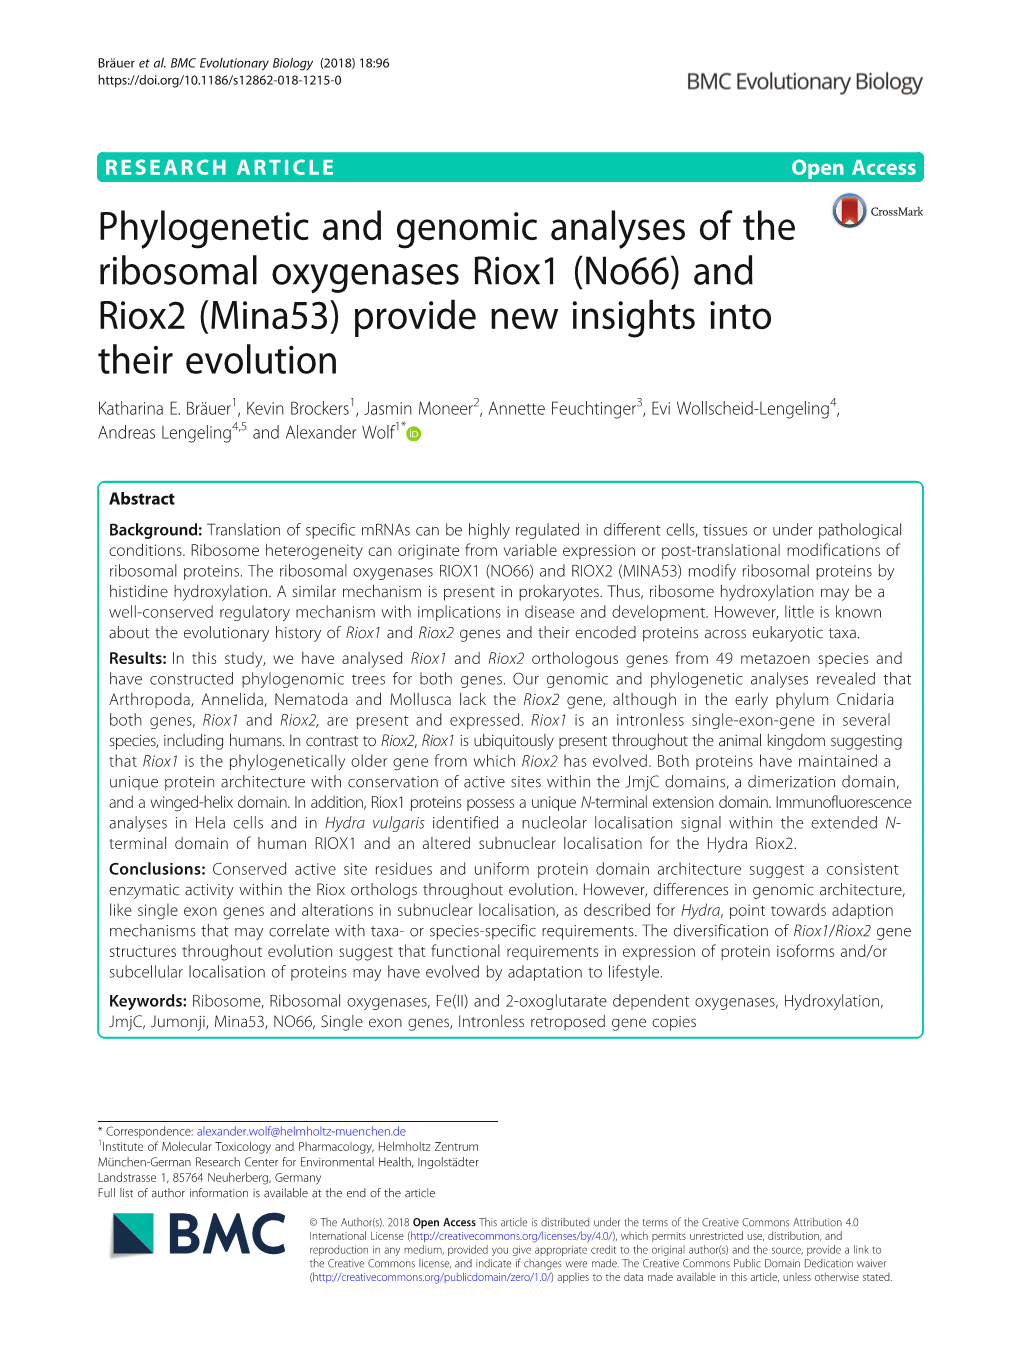 Phylogenetic and Genomic Analyses of the Ribosomal Oxygenases Riox1 (No66) and Riox2 (Mina53) Provide New Insights Into Their Evolution Katharina E